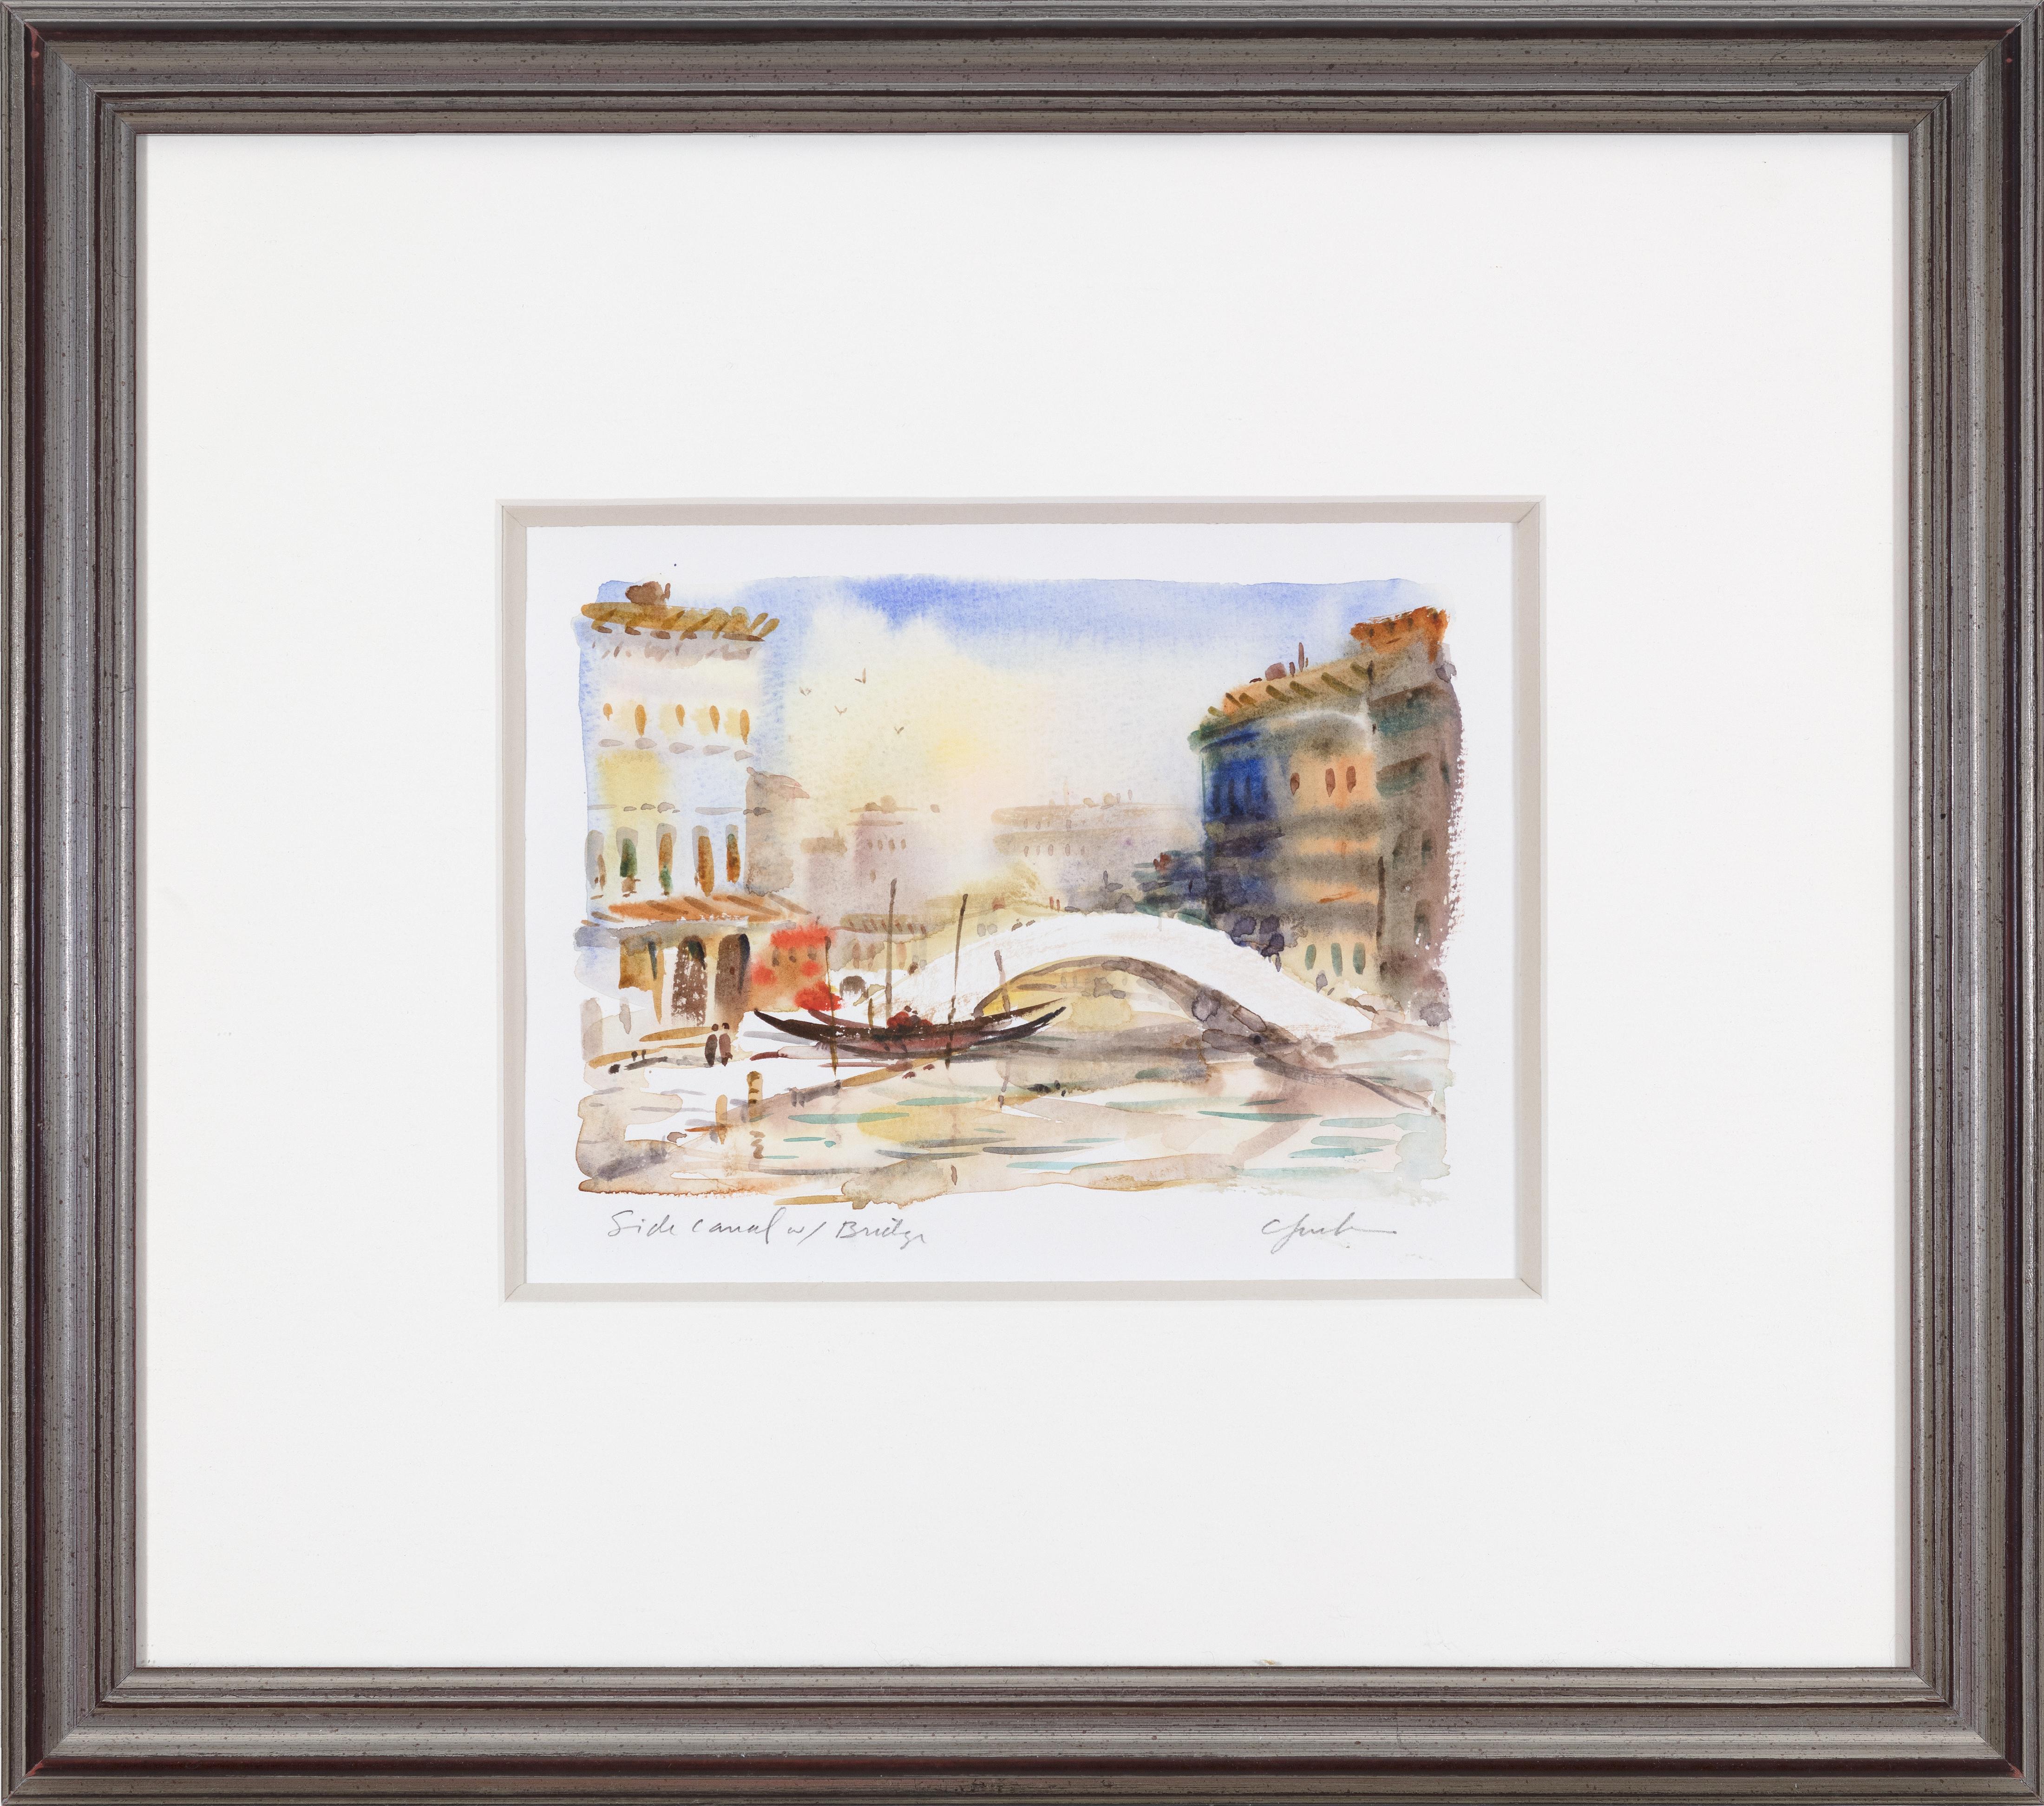 'Side Canal with Bridge'  is an original watercolor on Holbein watercolor paper by Craig Lueck. These petite watercolors that shape Lueck's portfolio serve as windows into the artist's world.

5" x 6-1/2" art
 13-5/8" x 15-3/8" frame

From